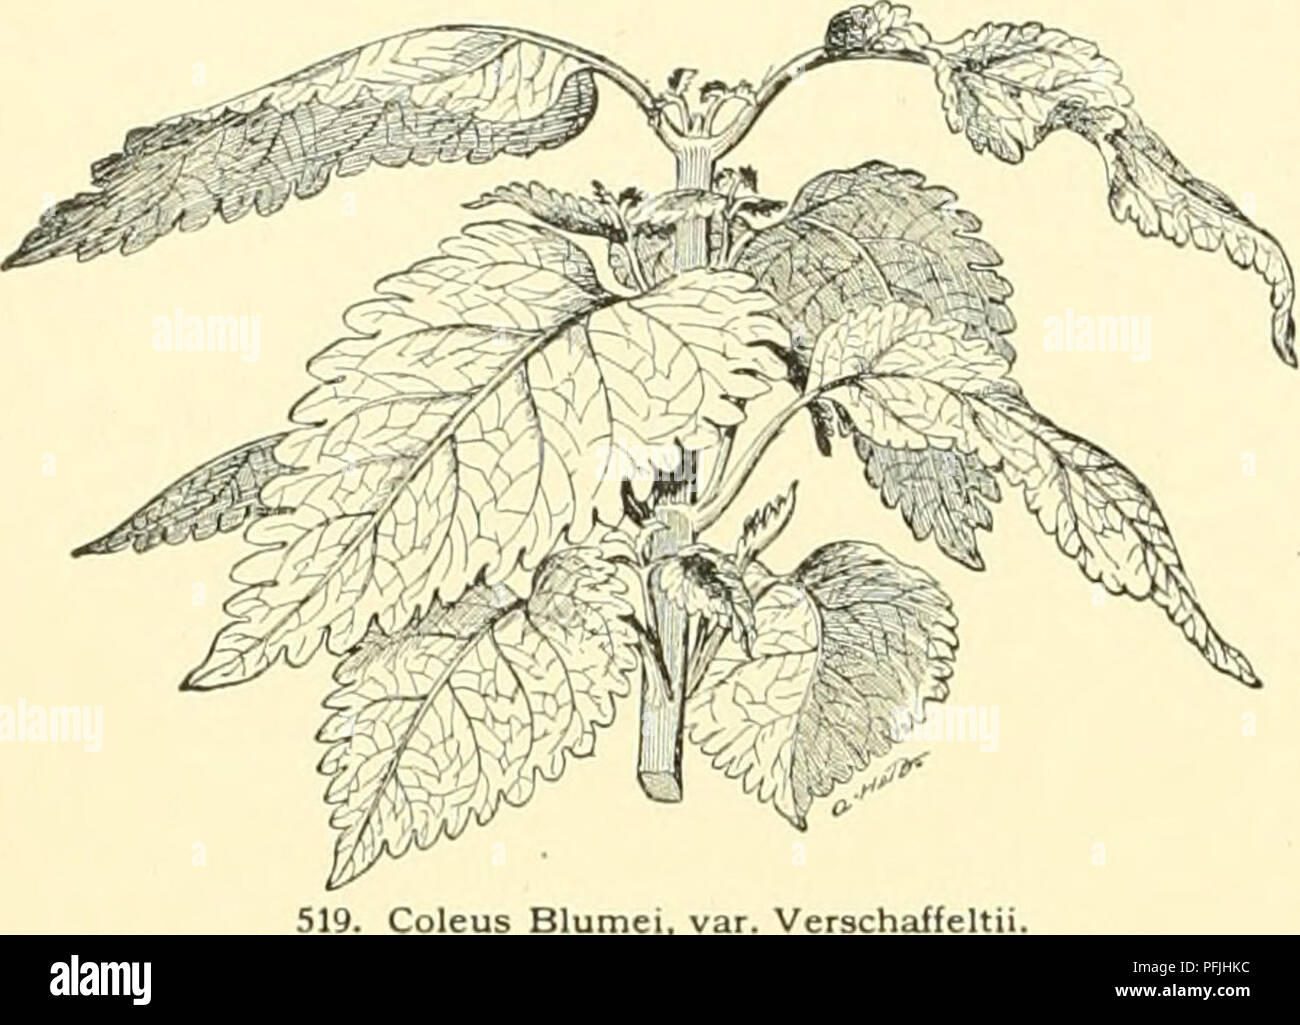 . Cyclopedia of American horticulture, comprising suggestions for cultivation of horticultural plants, descriptions of the species of fruits, vegetables, flowers and ornamental plants sold in the United States and Canada, together with geographical and biographical sketches, and a synopsis of the vegetable kingdom. Gardening -- Dictionaries; Plants -- North America encyclopedias. 352 COLEUS COLLOMIA shrub. 2-3 ft. high: stems pubescent: Ivs. cordate, coarsely ere- nate. lower ones 7 in. long: fls. blue, in racemes which contain as many as 18 forking cymes with about 10 fls. in each. B.M.7672.  Stock Photo